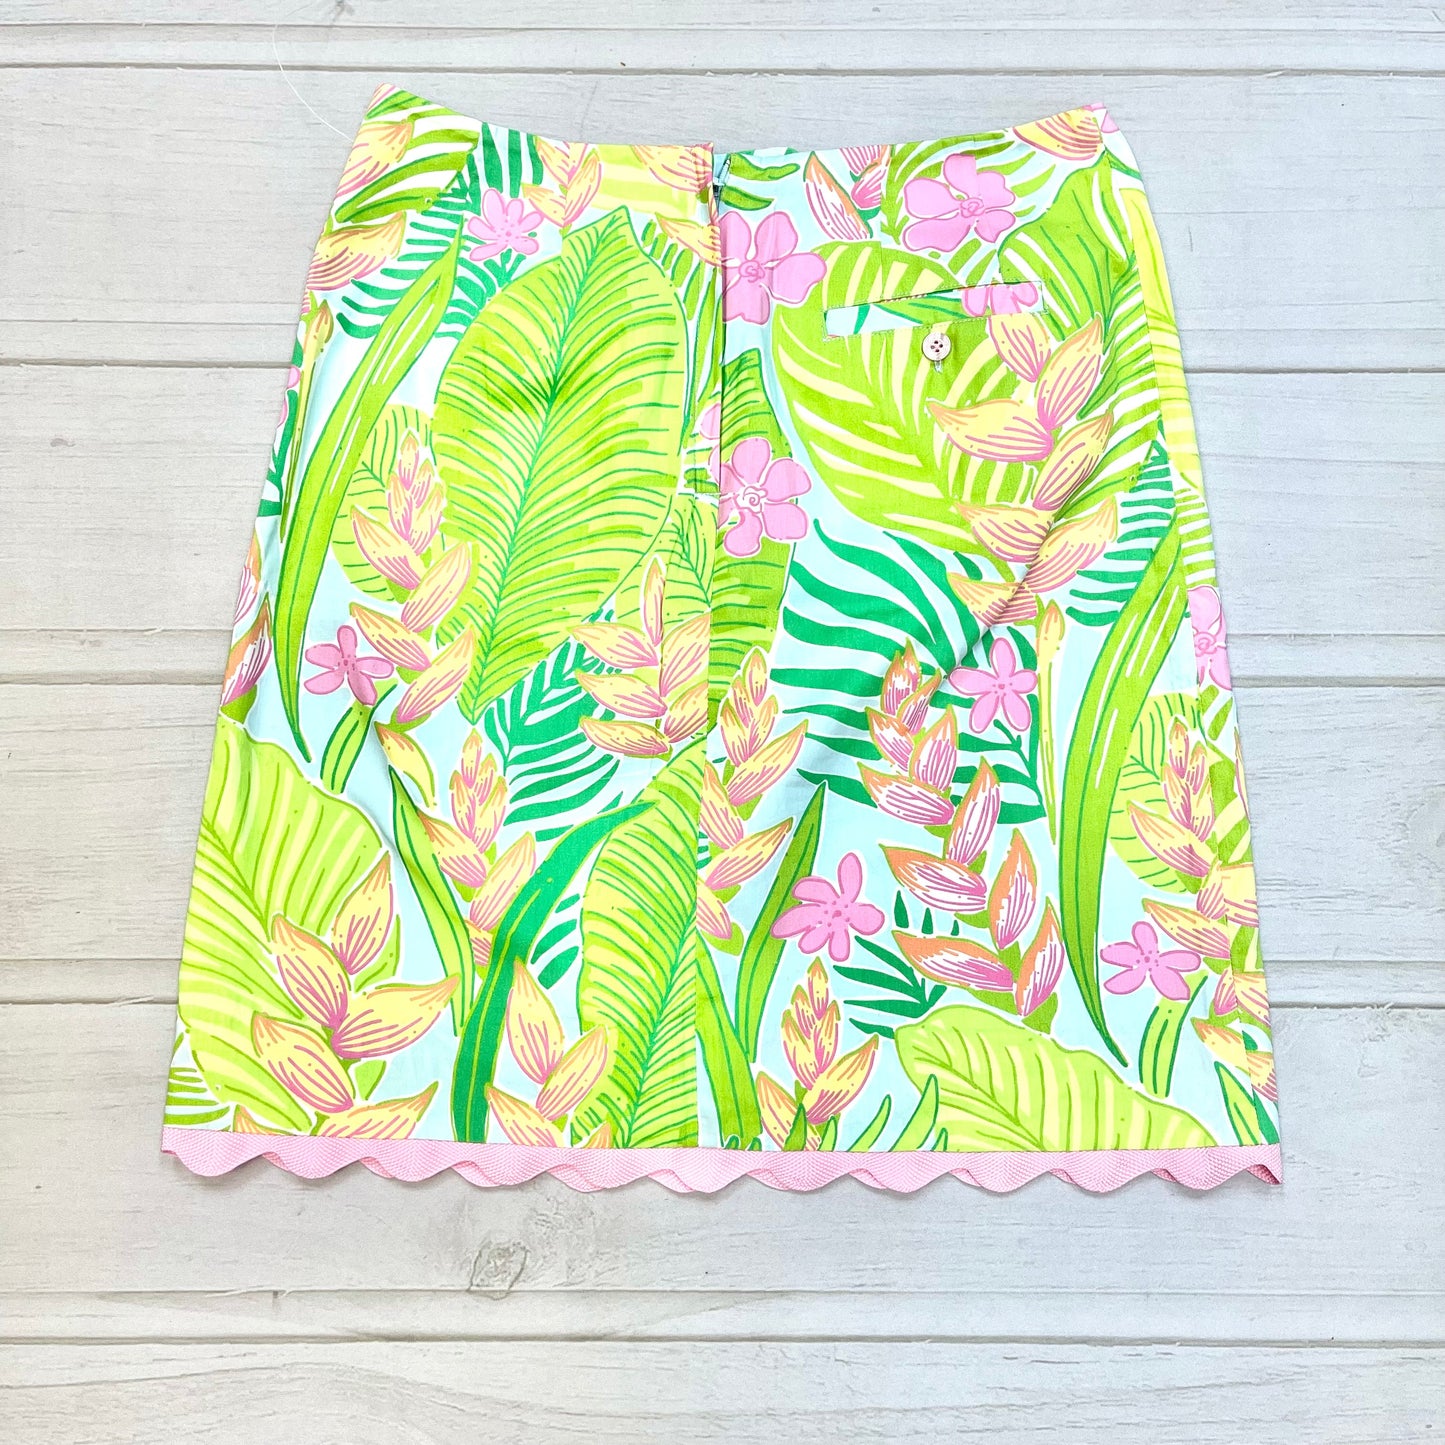 Skirt Designer By Lilly Pulitzer  Size: 2